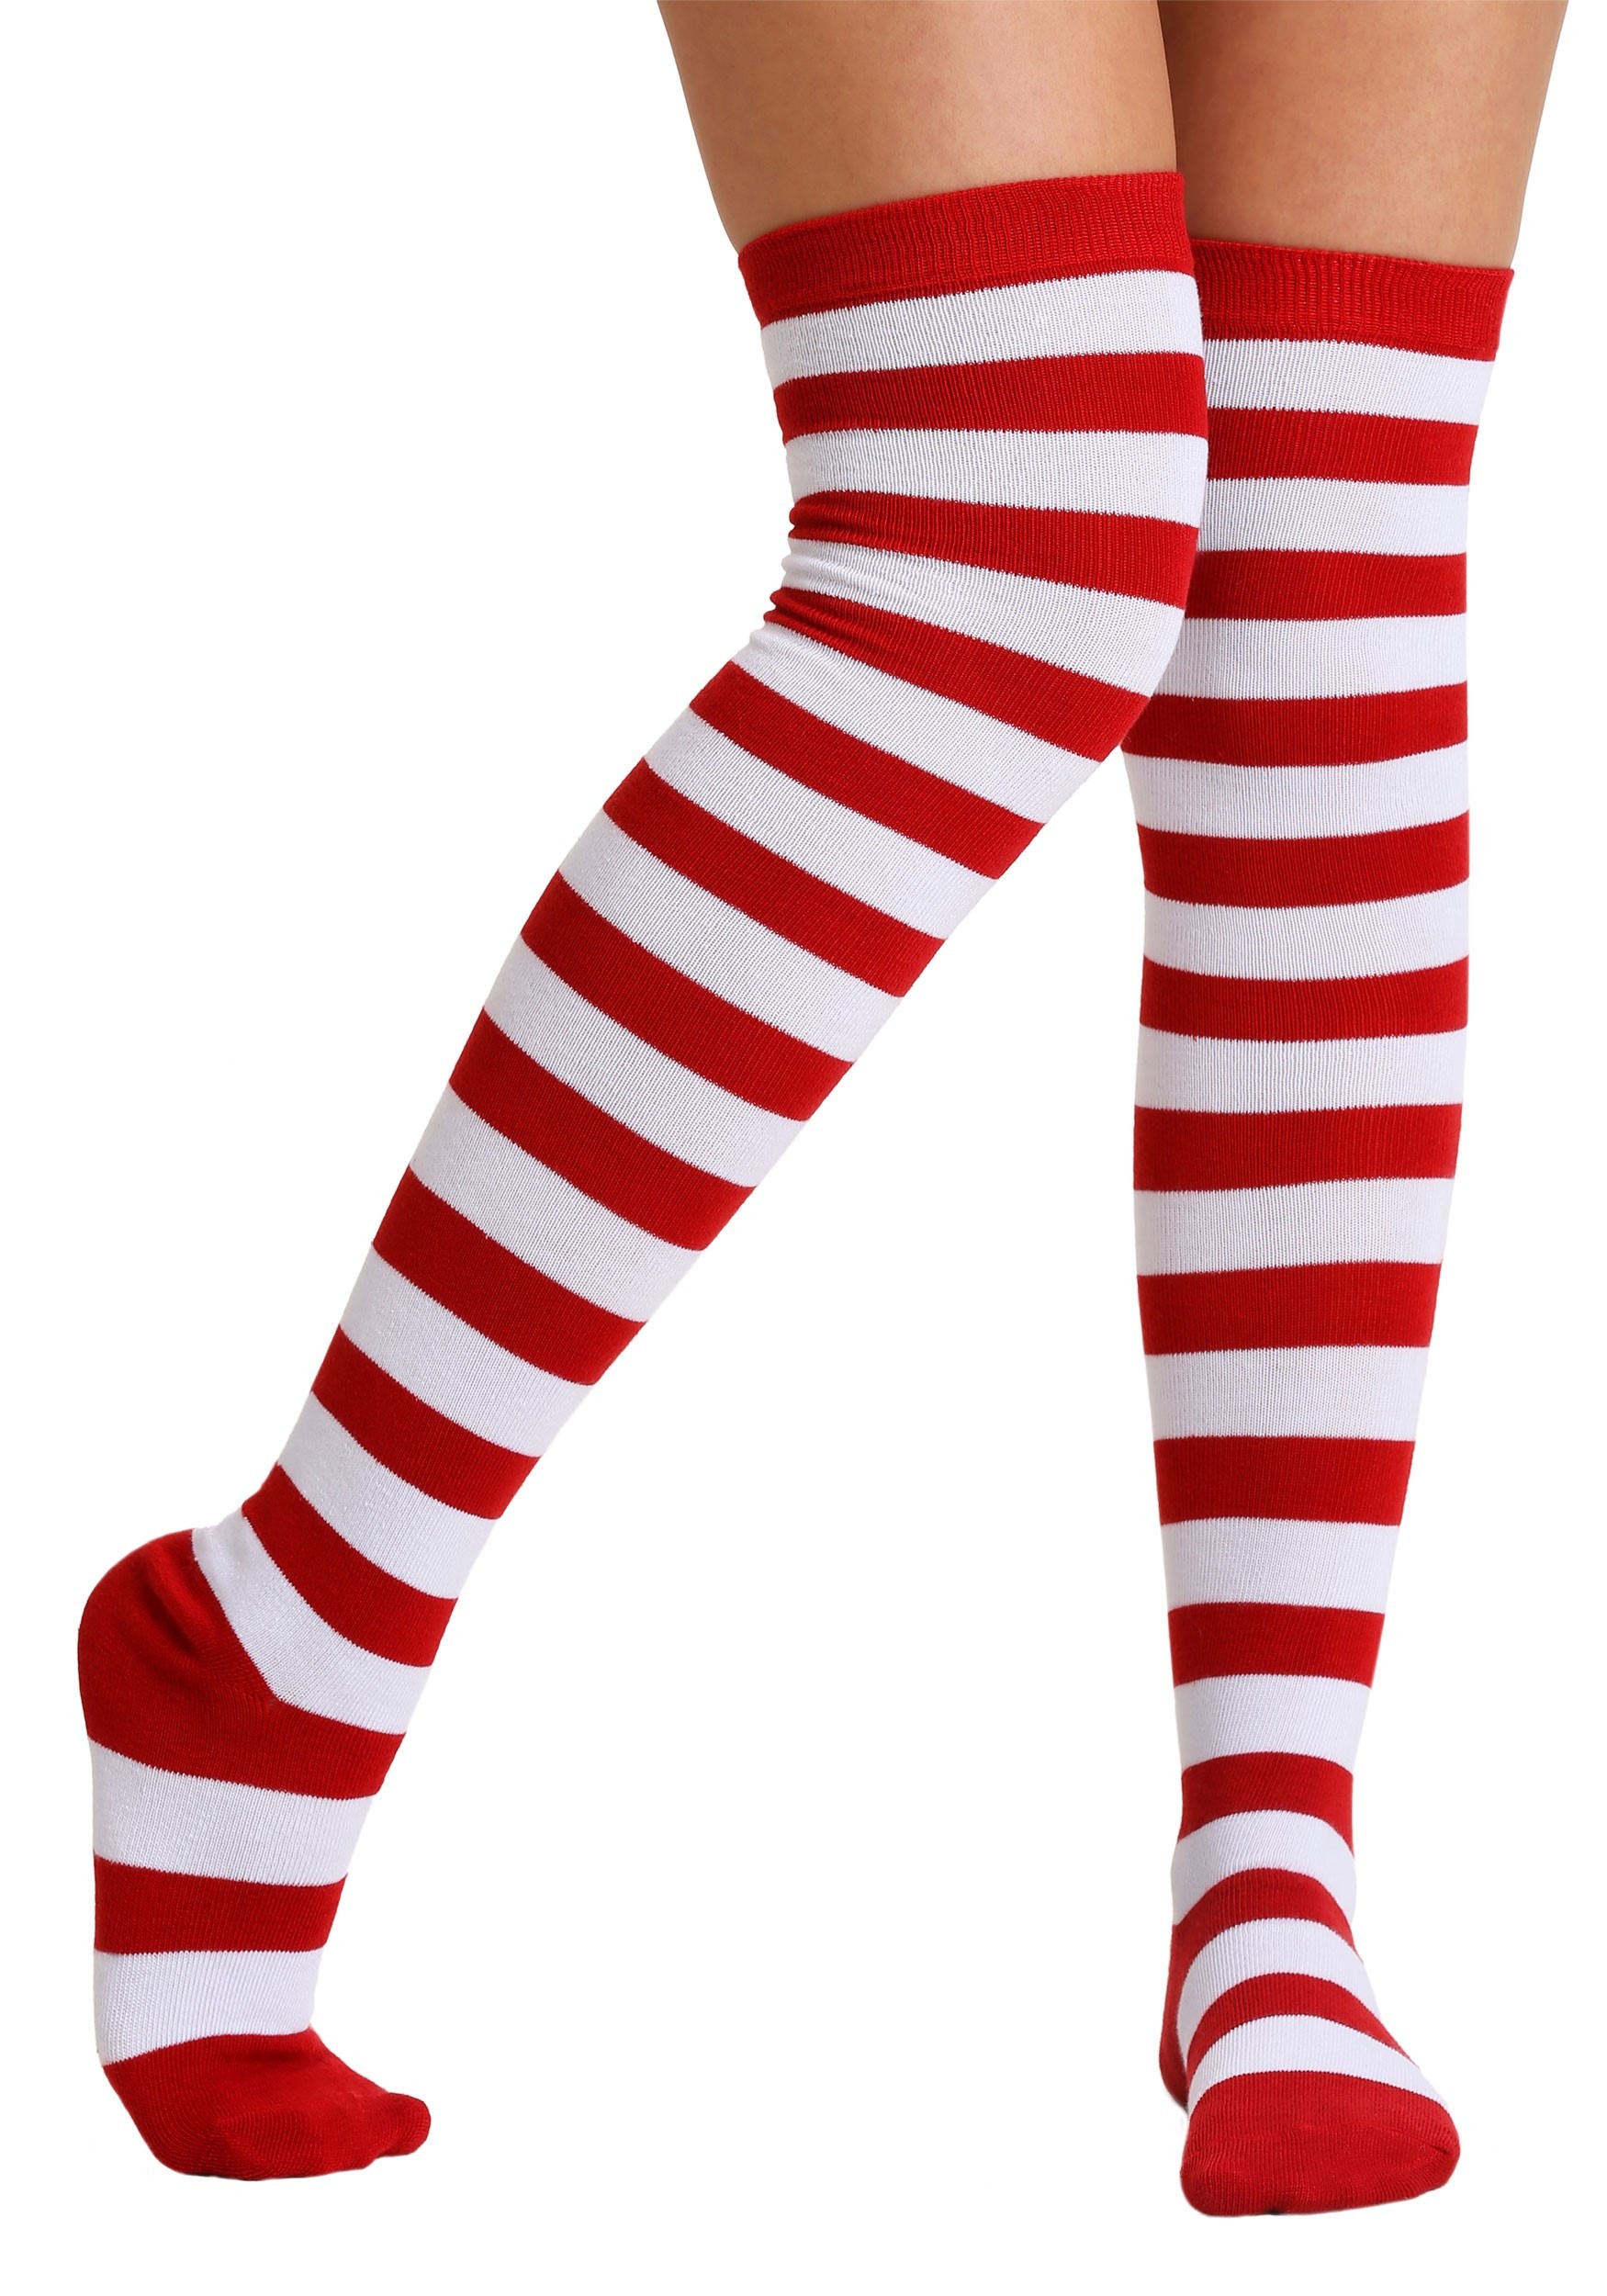 Red and White Striped Socks for Adults